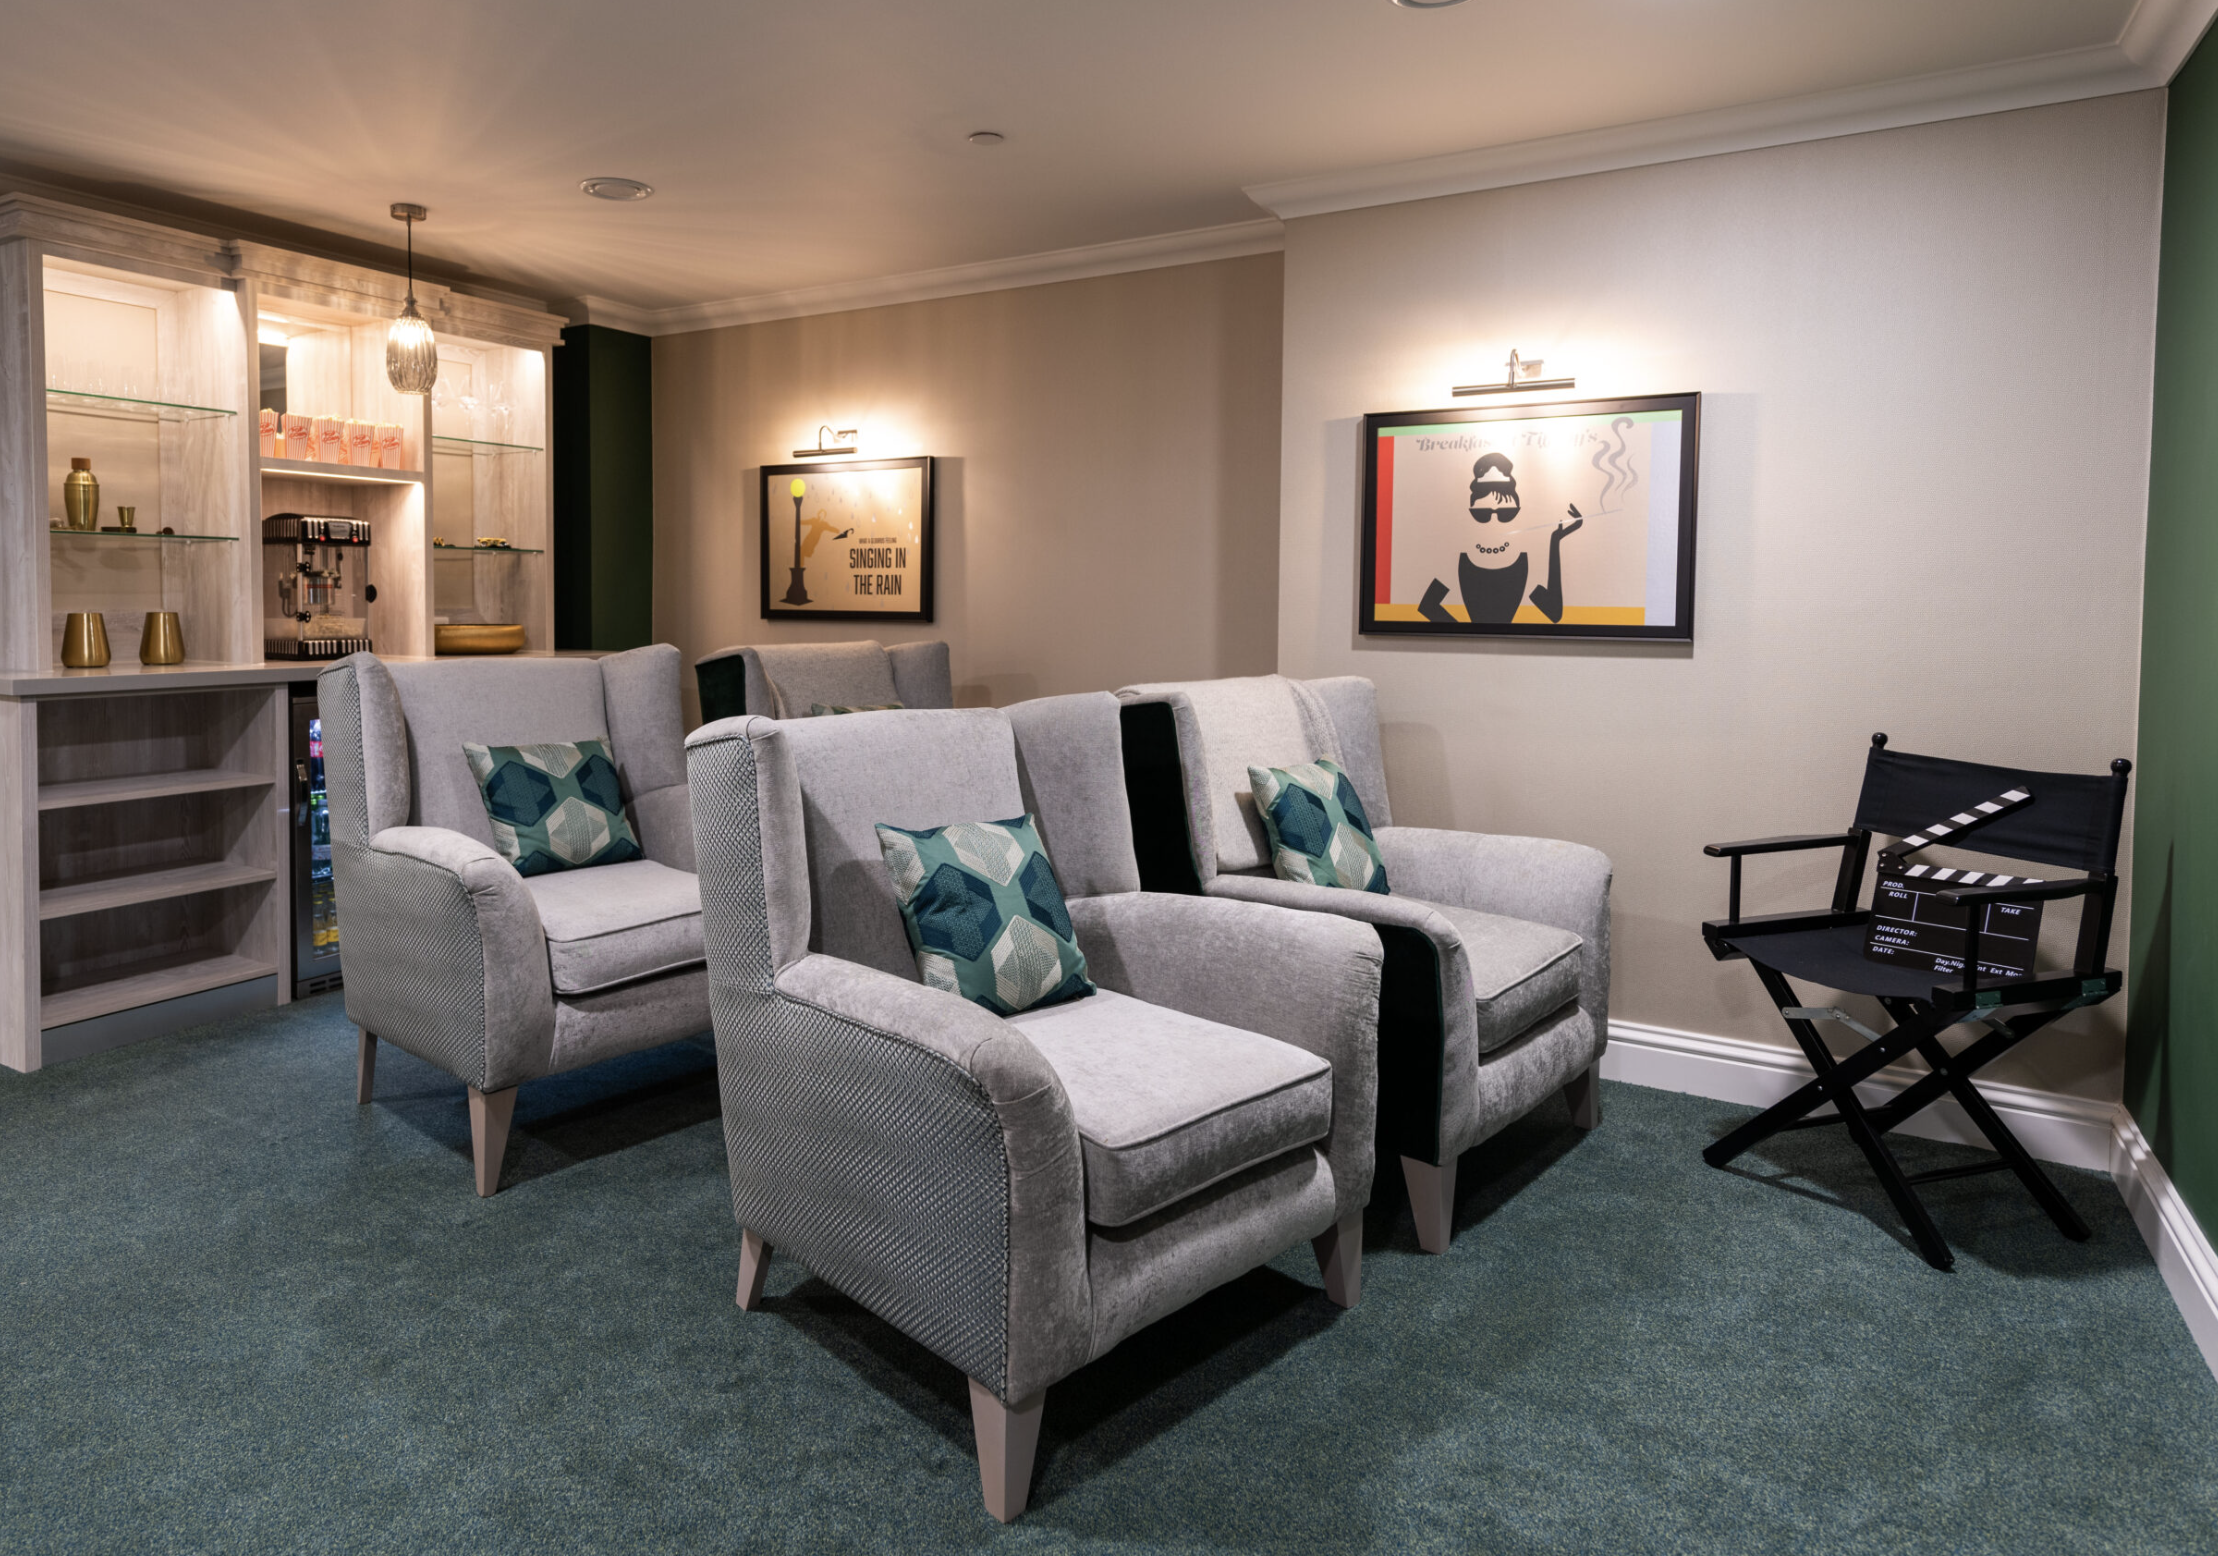 Cinema of Chestnut Manor care home in Wanstead, London